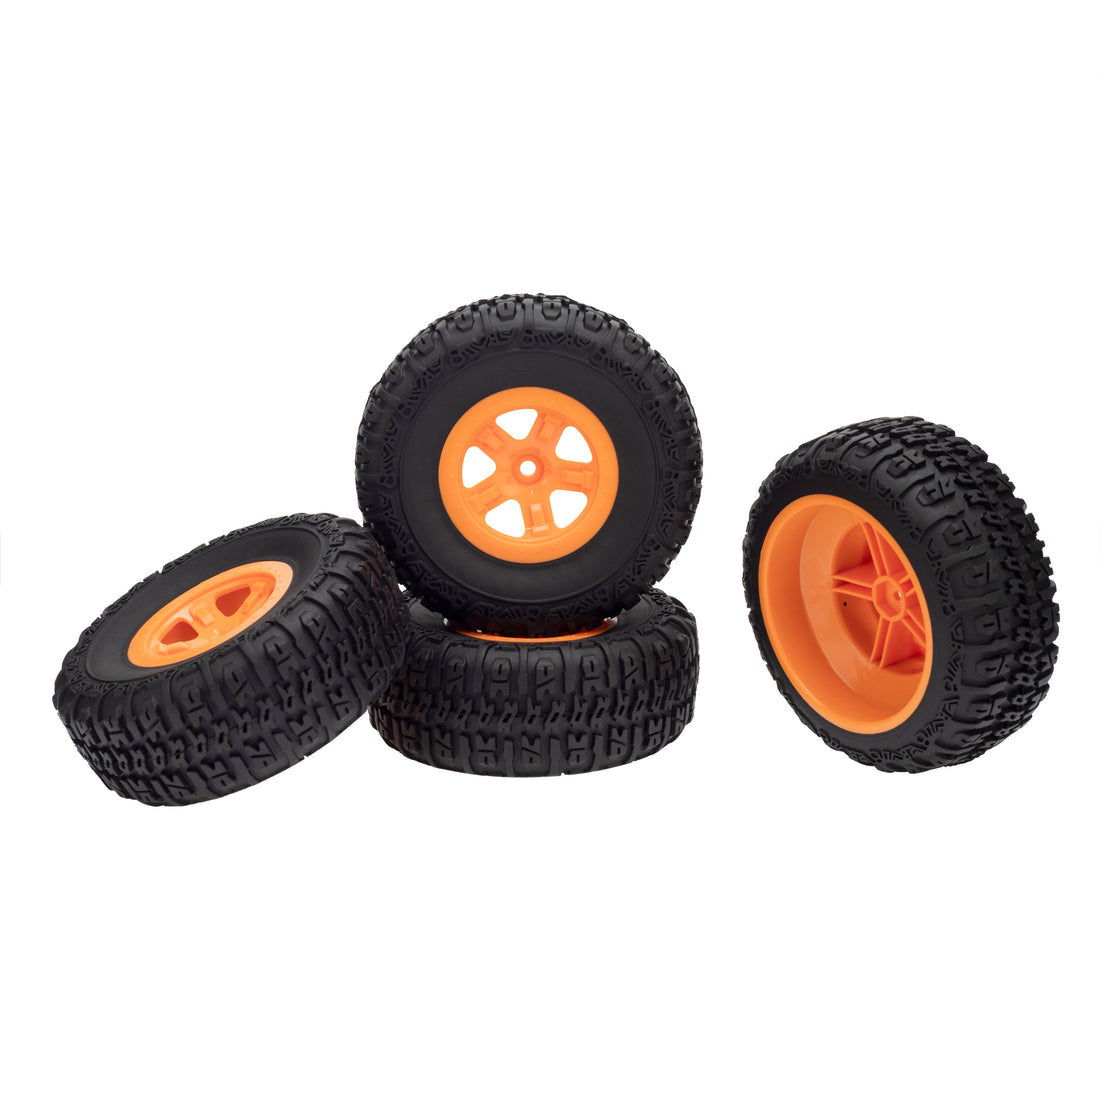 A-Orange RC Truck Buggy Rubber Tires